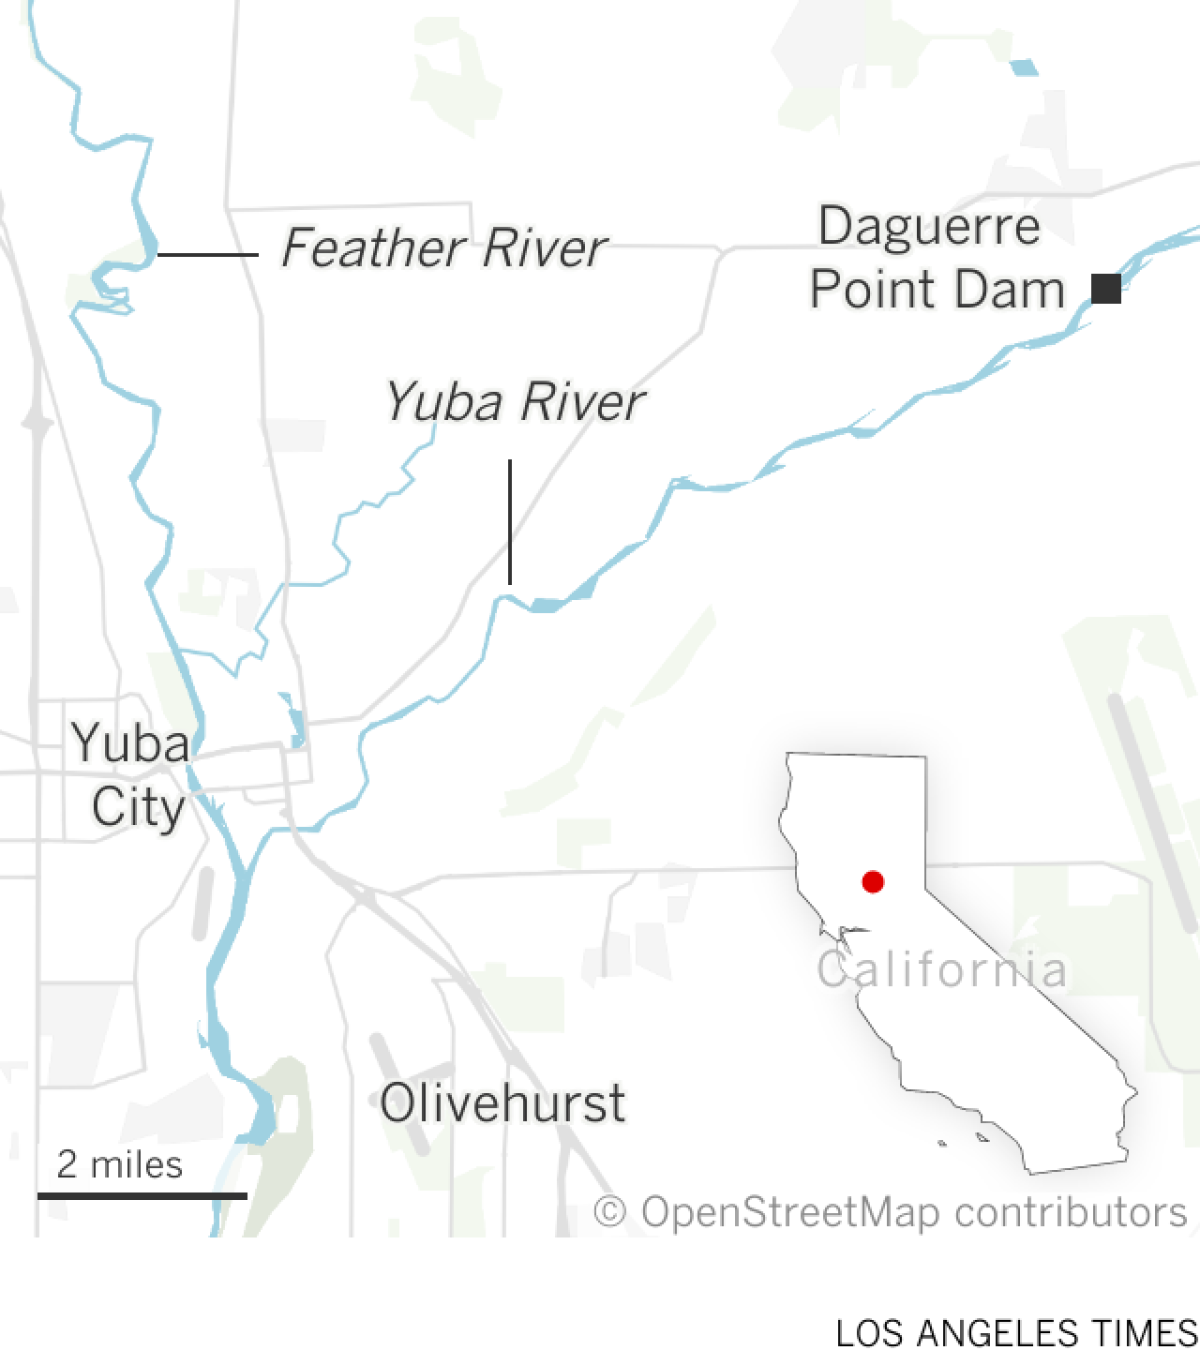 Map shows the location of the Daguerre Point Dam on the Yuba River in Northern California.